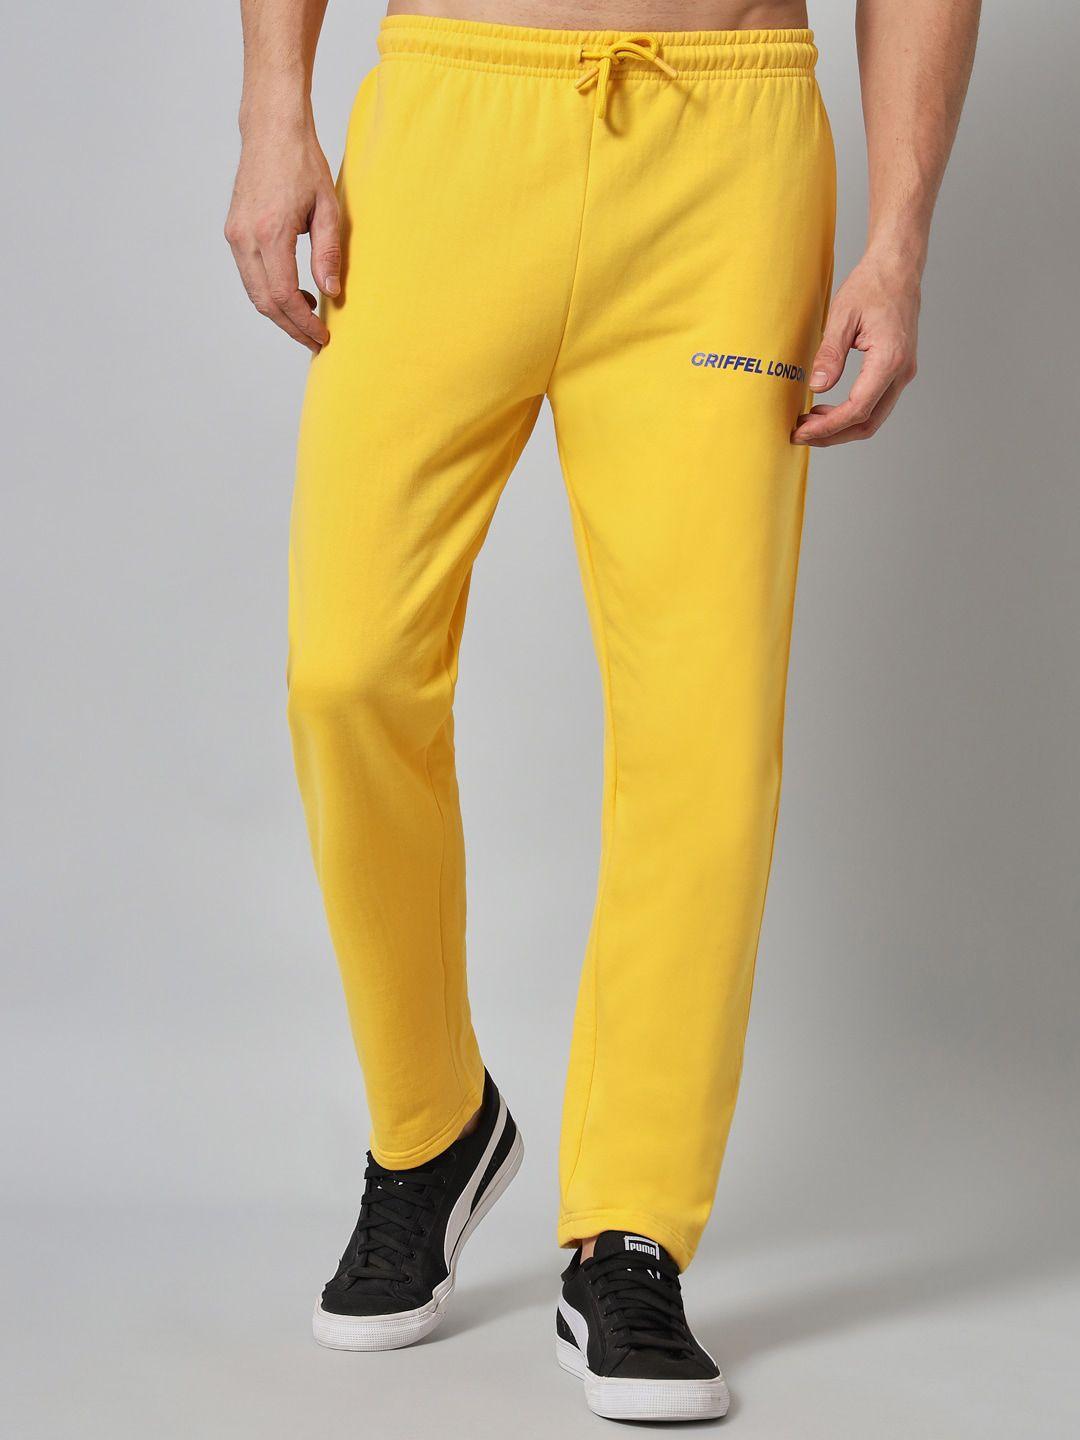 griffel men yellow solid pure cotton track pants